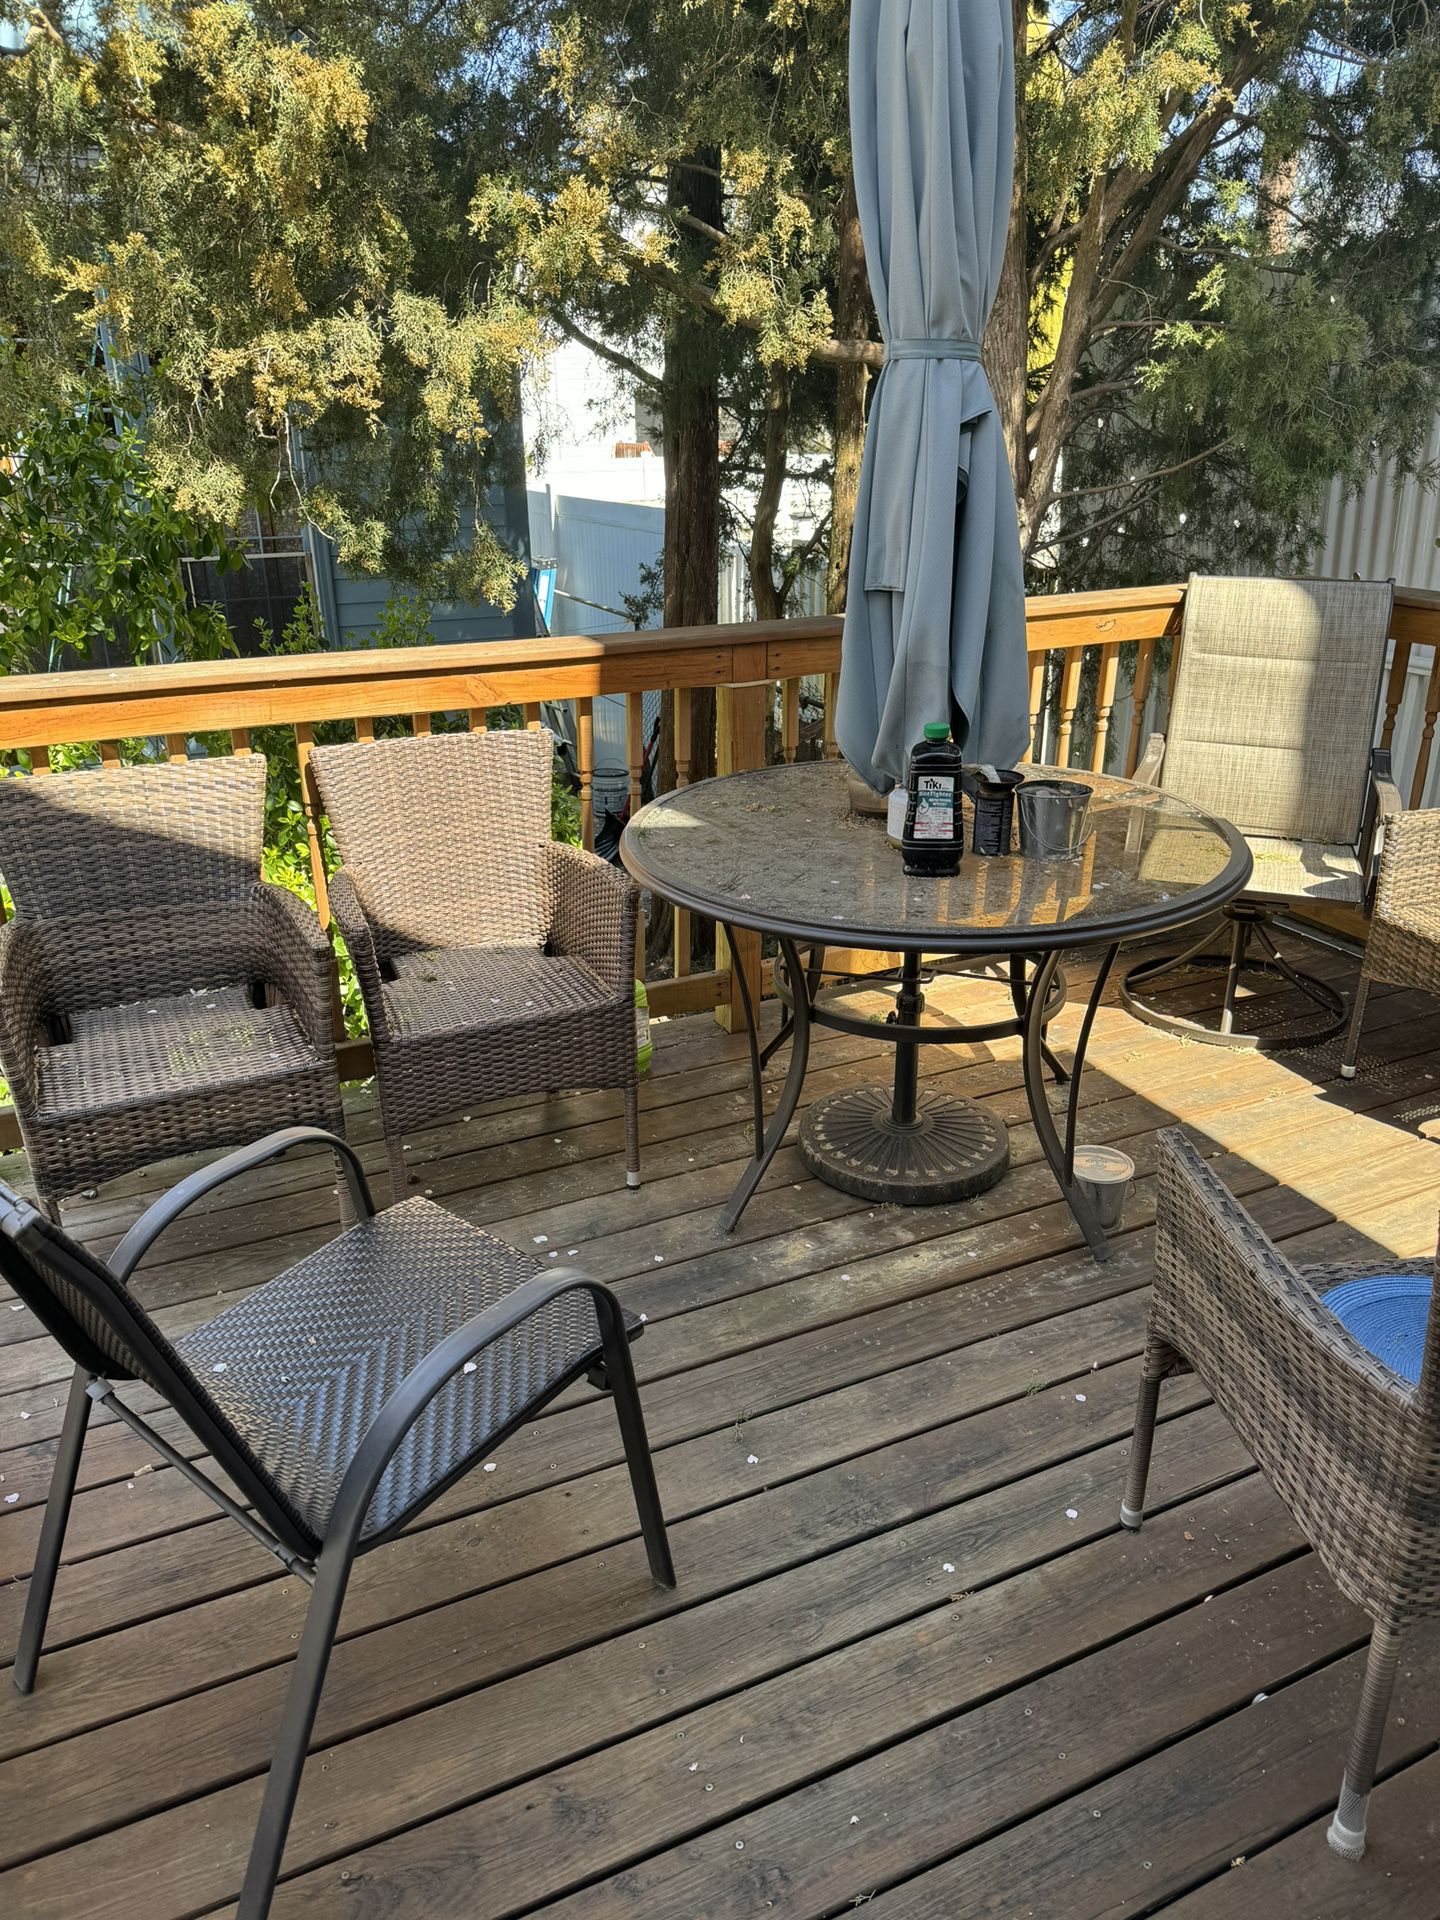 Patio Furniture, Table With Chairs And Red Cushions